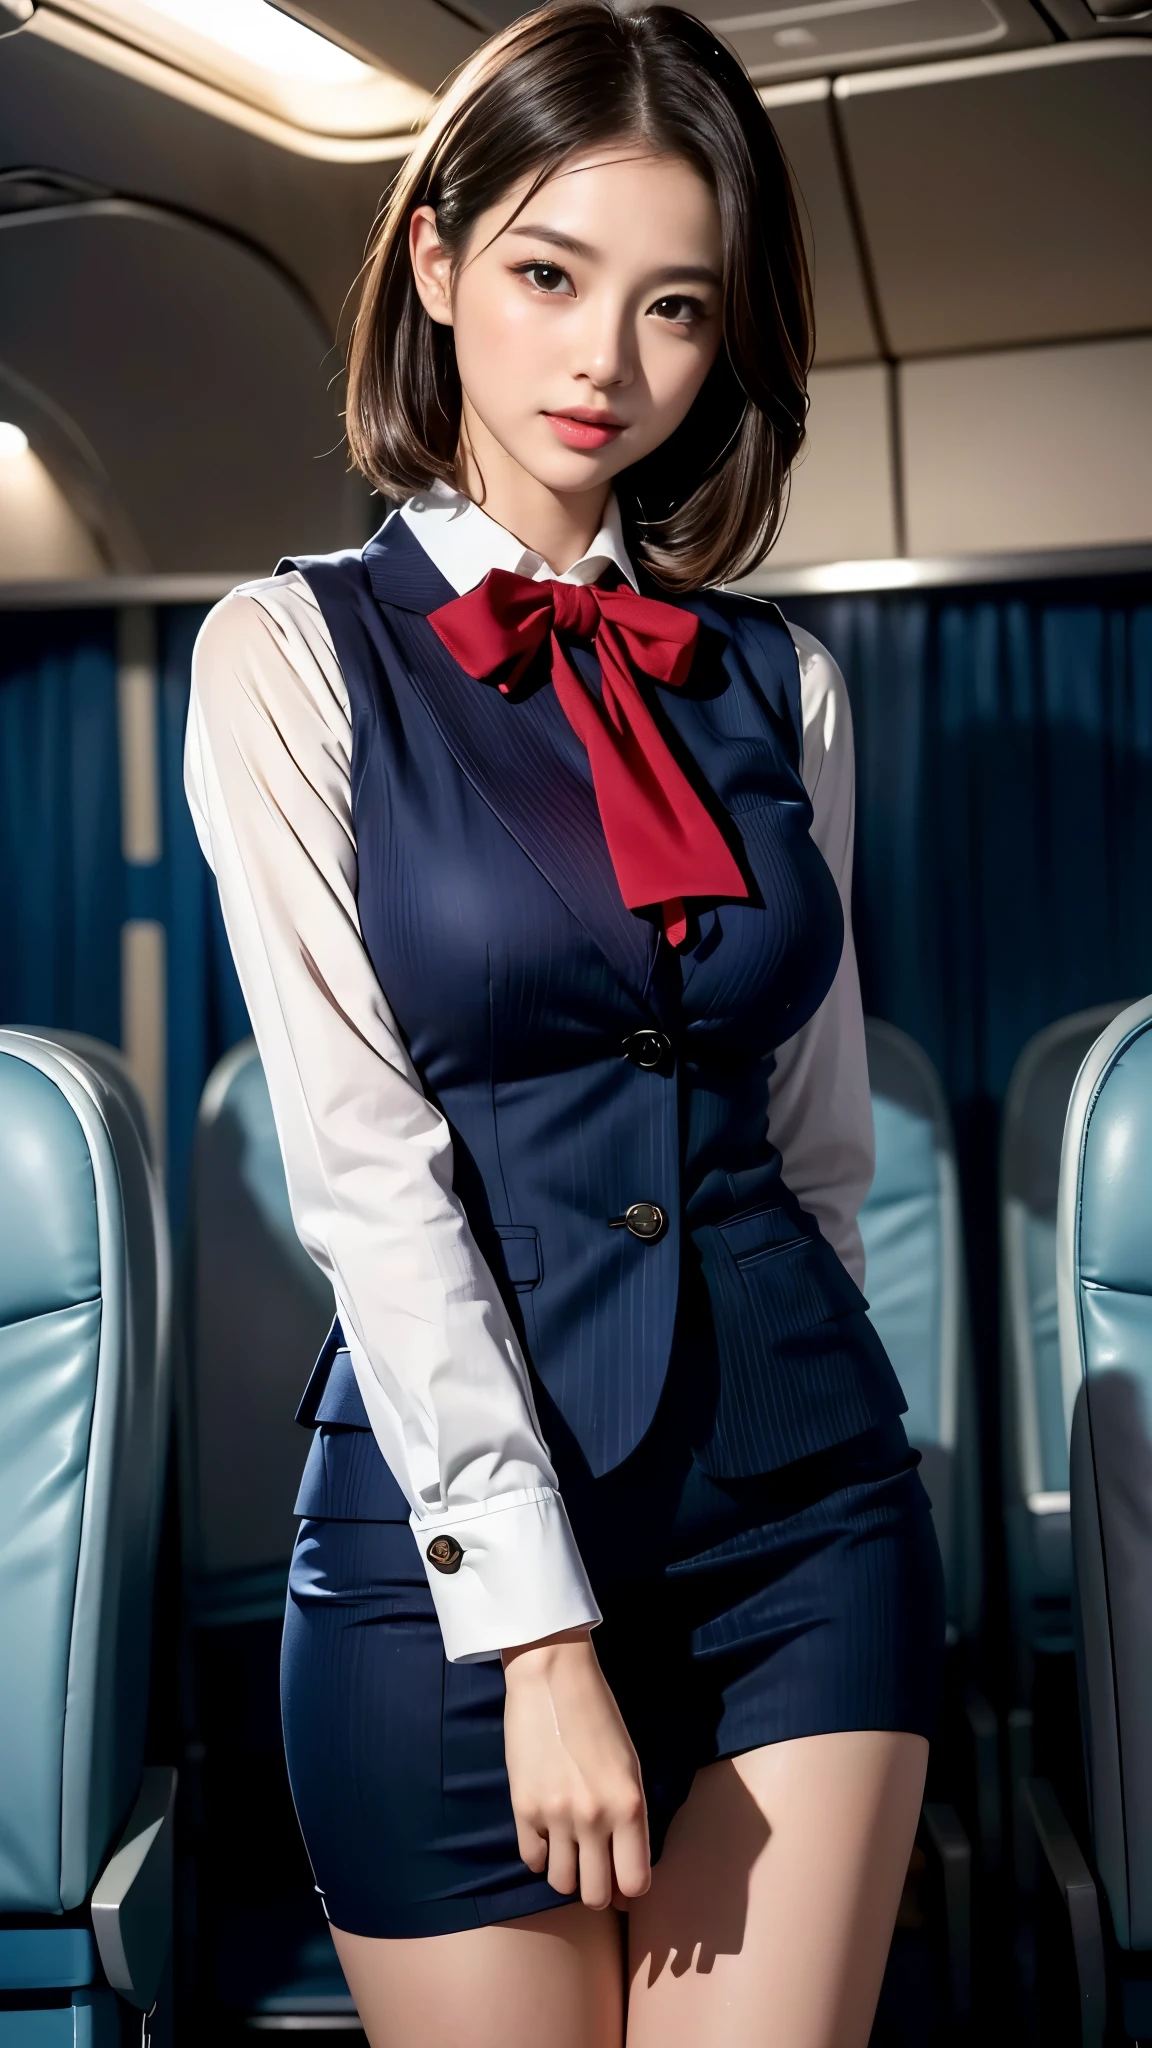 ((Business class flight attendant seat on airplane))、18-year-old、Beauty、flight attendant、cabin attendant、stewardess、outstanding style、short bob、straight、brown hair、(seductive big breasts:1.3)、(Moisturizing lips:1.5)、(((Realistic uniforms)))、Stylish striped square scarf、Tight-fitting uniforms、(The Absolute Realm of Enchantion)、(detailed hands:1.3)、(detailed face)、(perfect anatomy)、(Brighten the contrast of shadows)、(Professional cinematic lighting)、(face lighting)、(nffsw++:1.10)、(ultra high resolution)、(highest quality)、(Improvement of quality)、(super detailed)、(accurate color)、(Photoreal)、(looking at the camera:1.5)